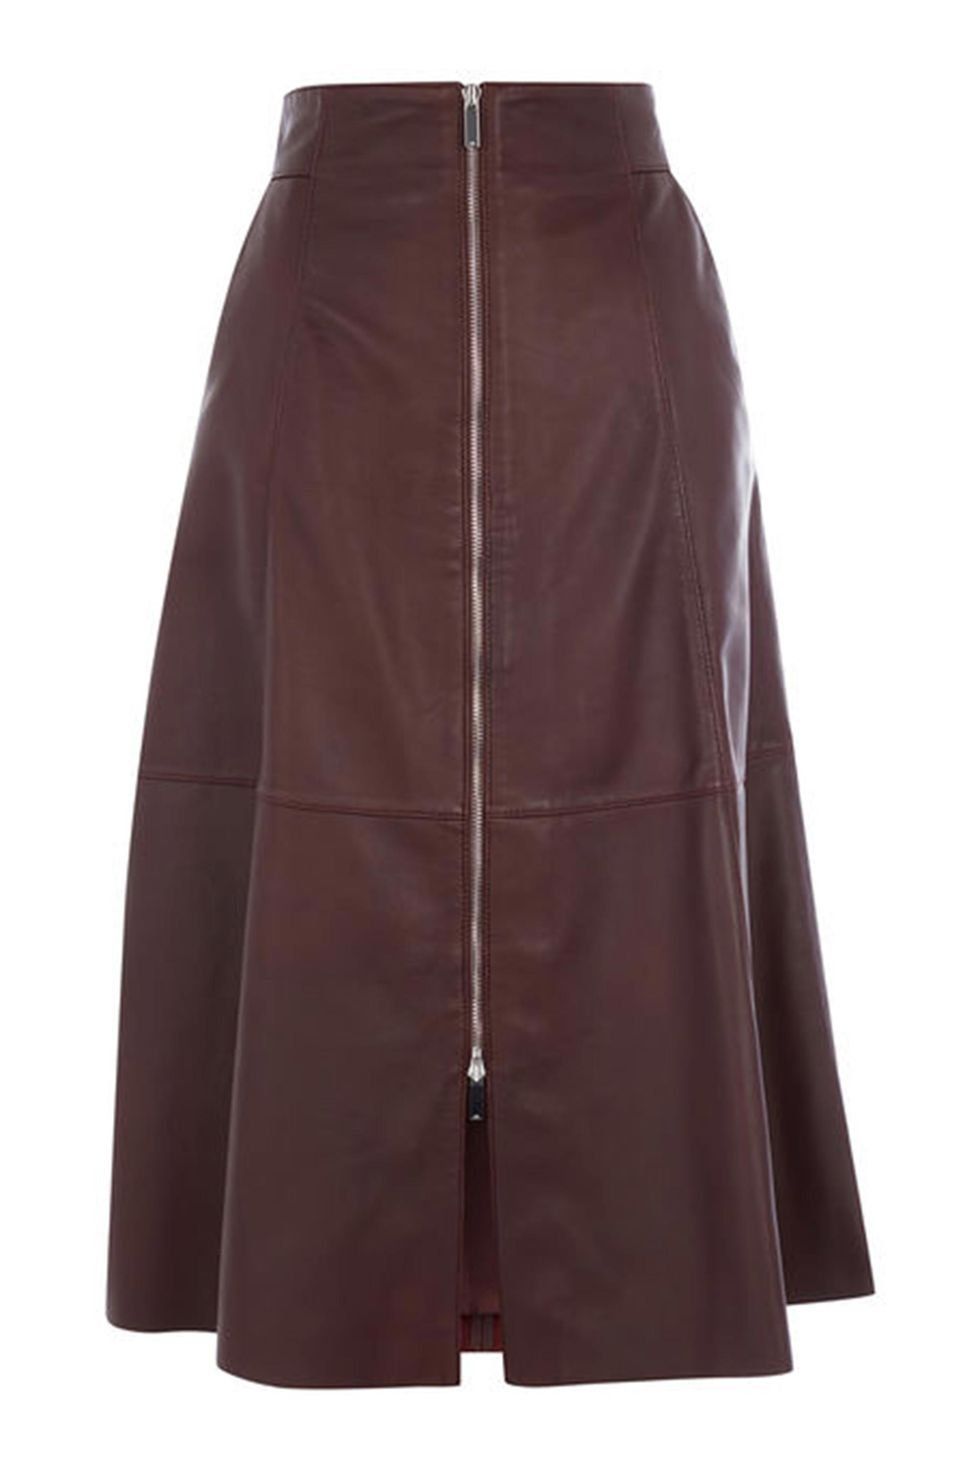 Clothing, Waist, Brown, A-line, Fashion, Pencil skirt, Outerwear, Shorts, Leather, Pocket, 